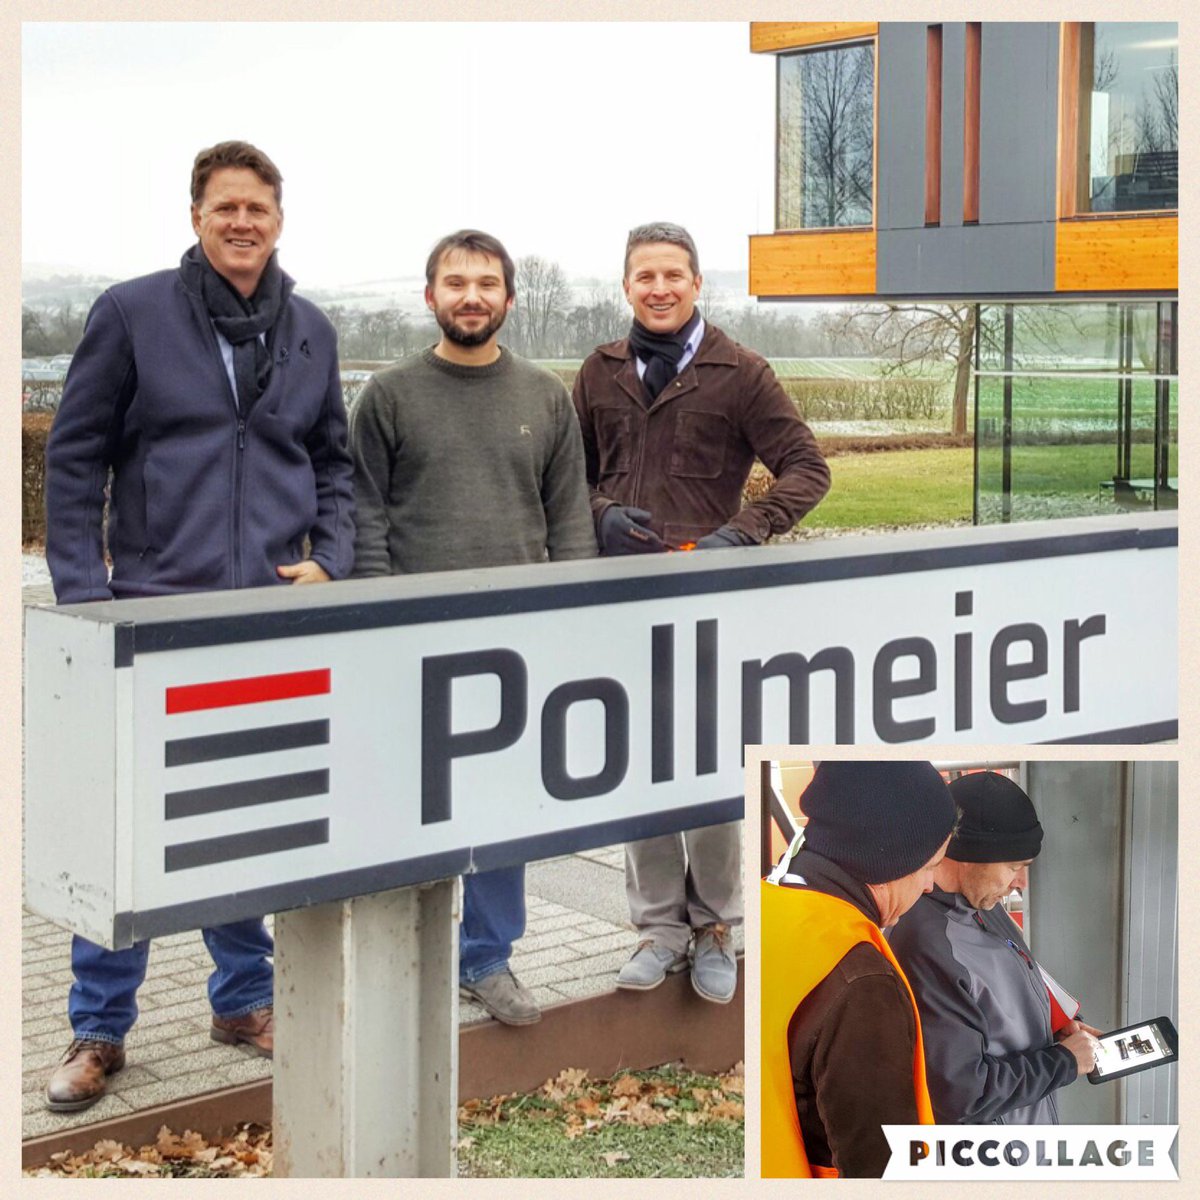 Productive meetings with #Pollmeier this week presenting our #innovative #digitalchecklist program. #humanreliability #sustainability